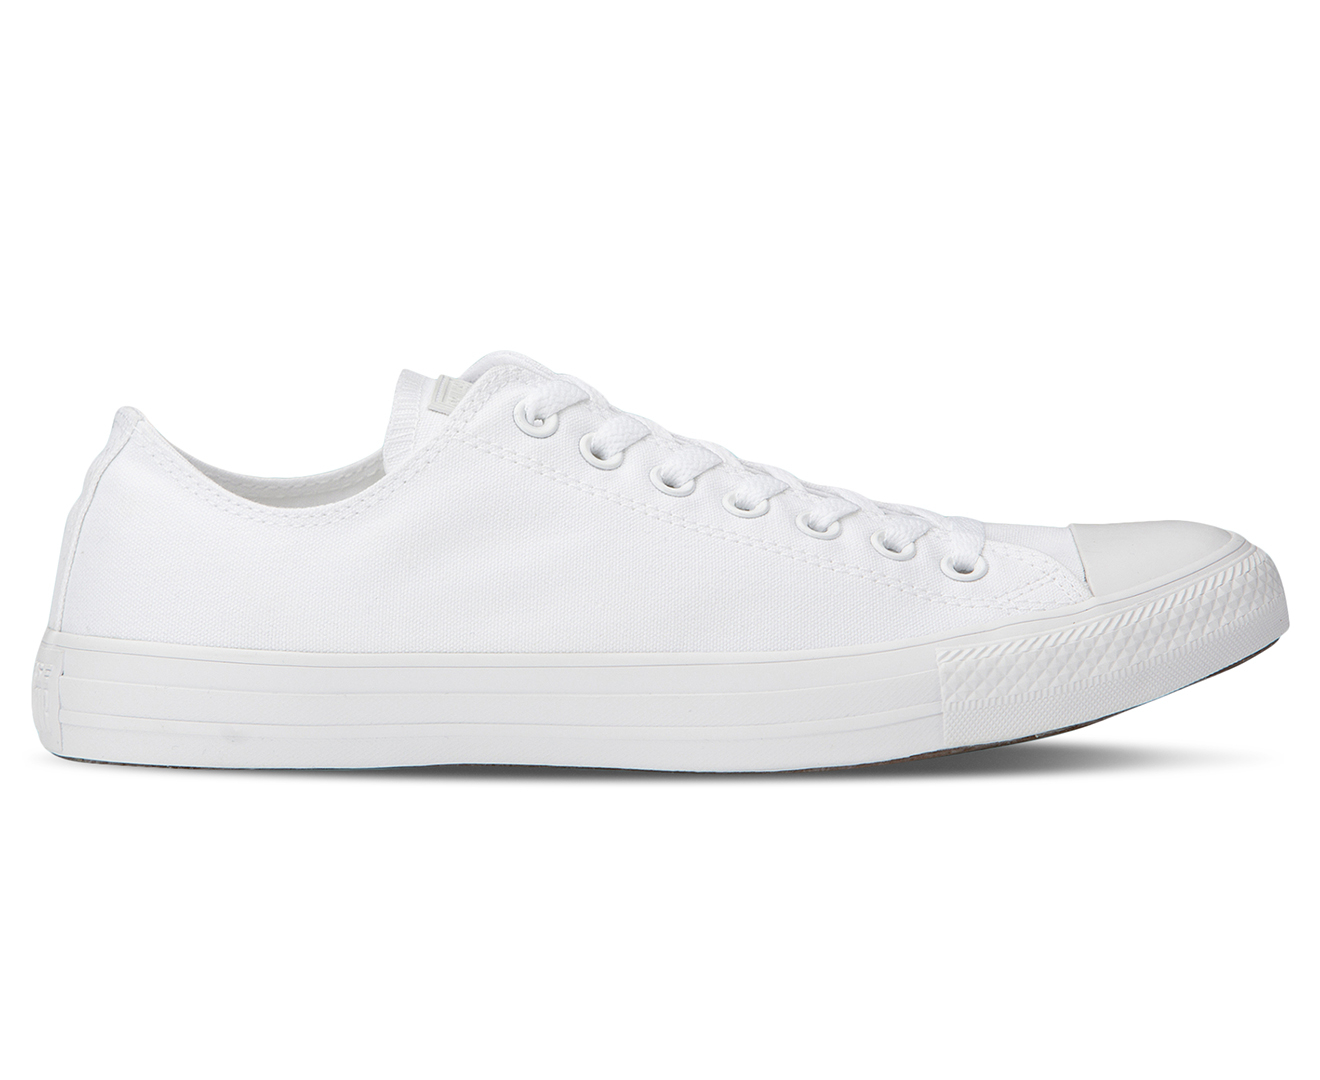 Converse Unisex Chuck Taylor All Star Low Top Sneakers - White ...